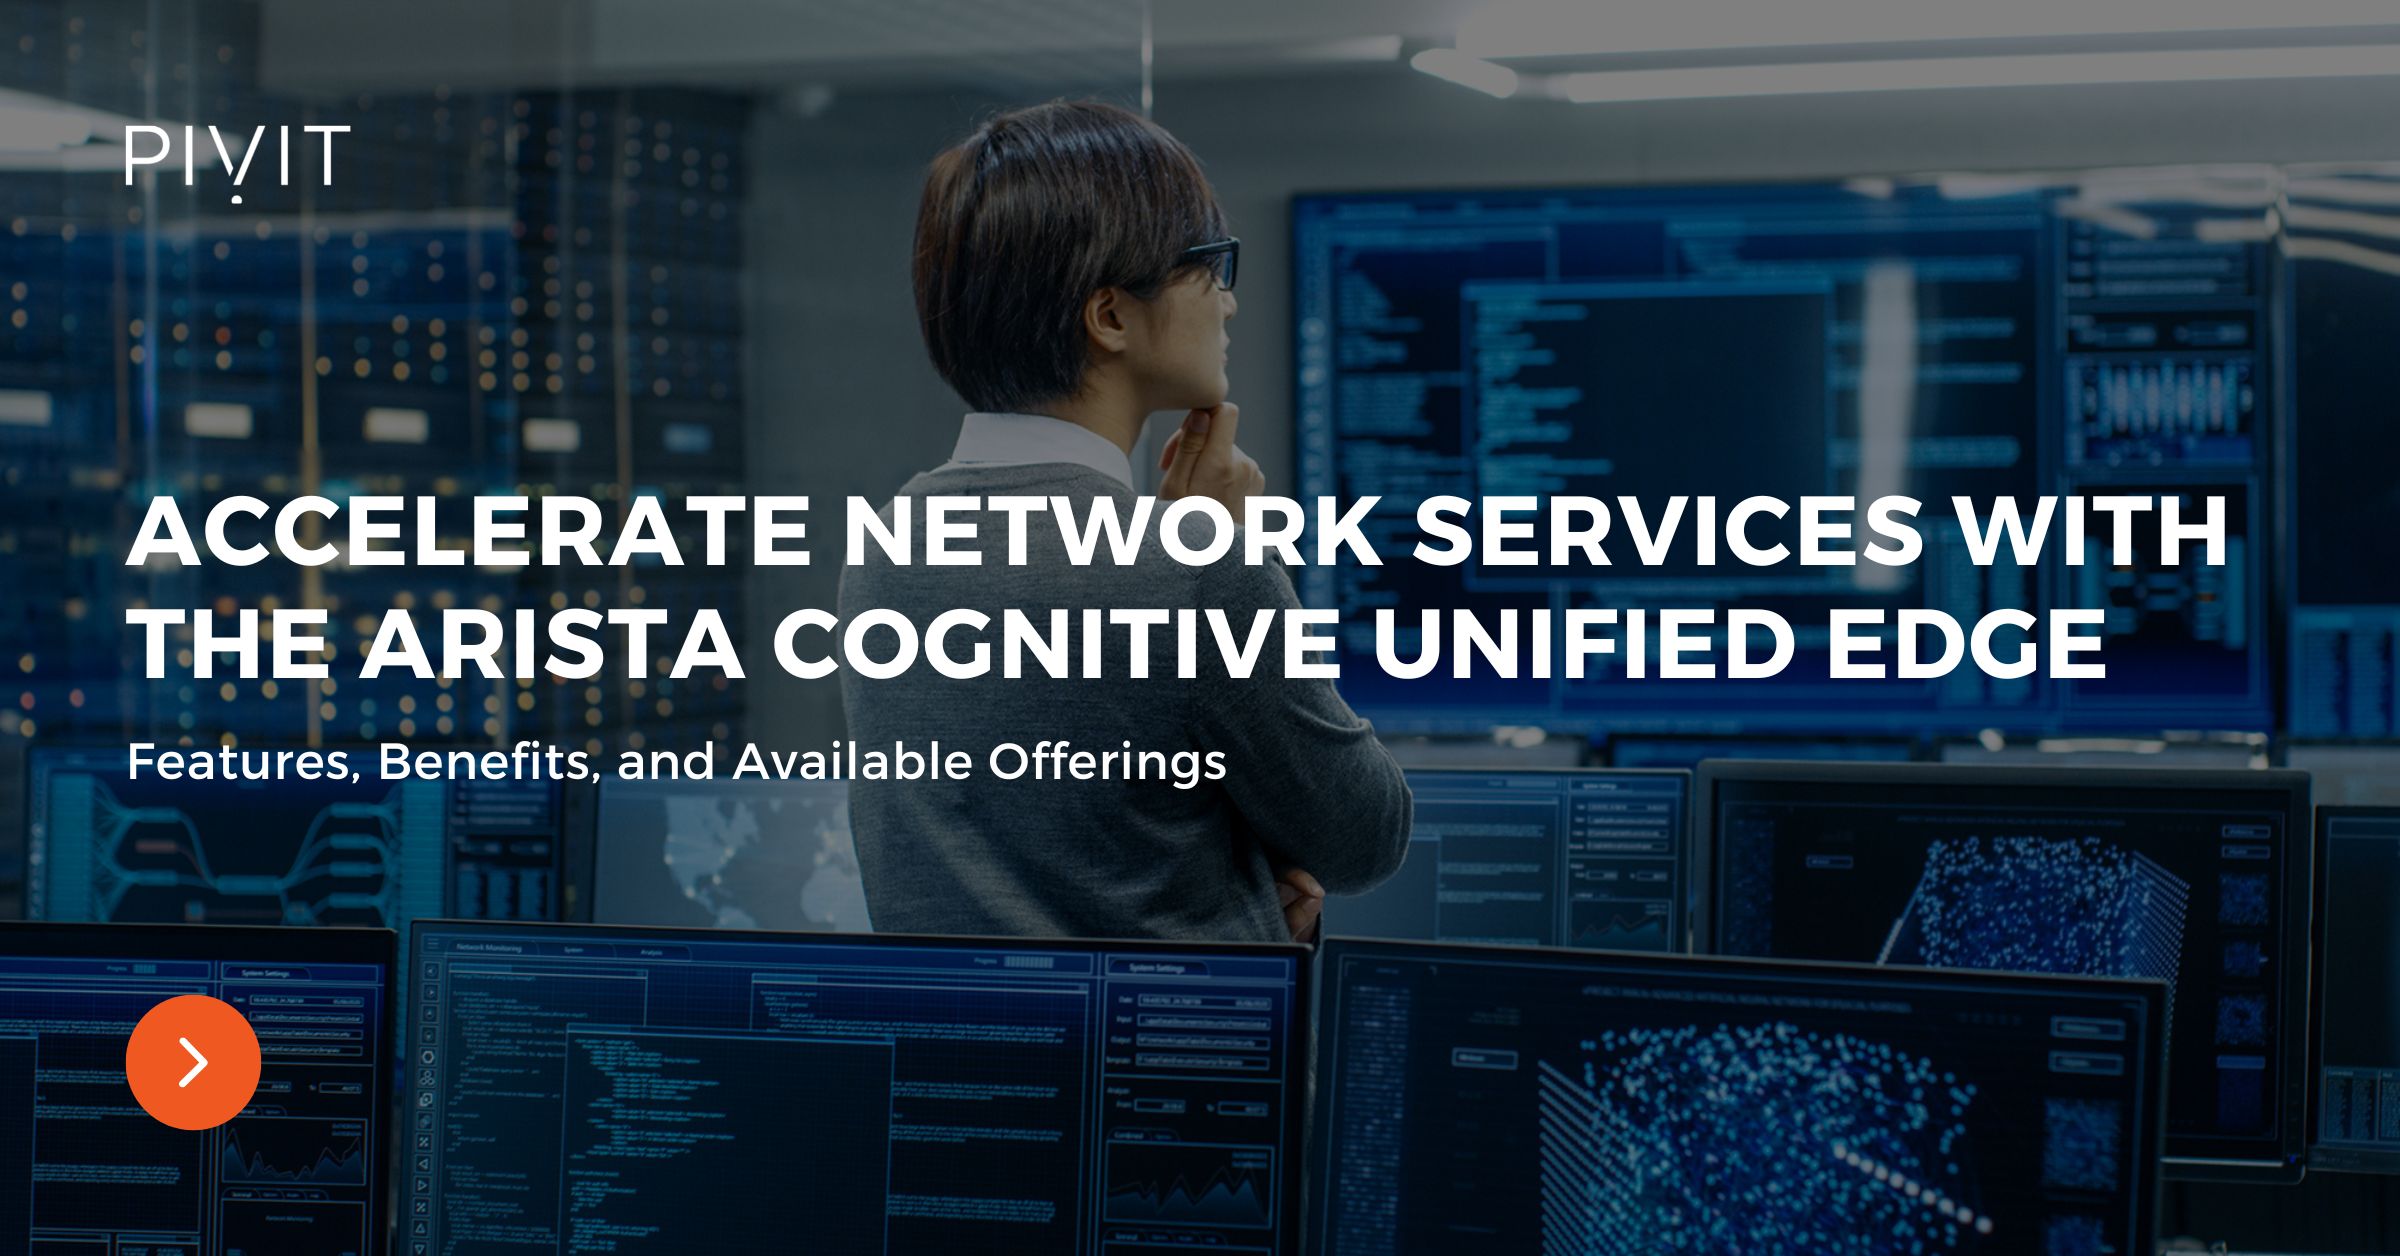 Accelerate Network Services with the Arista Cognitive Unified Edge - Features, Benefits, and Available Offerings